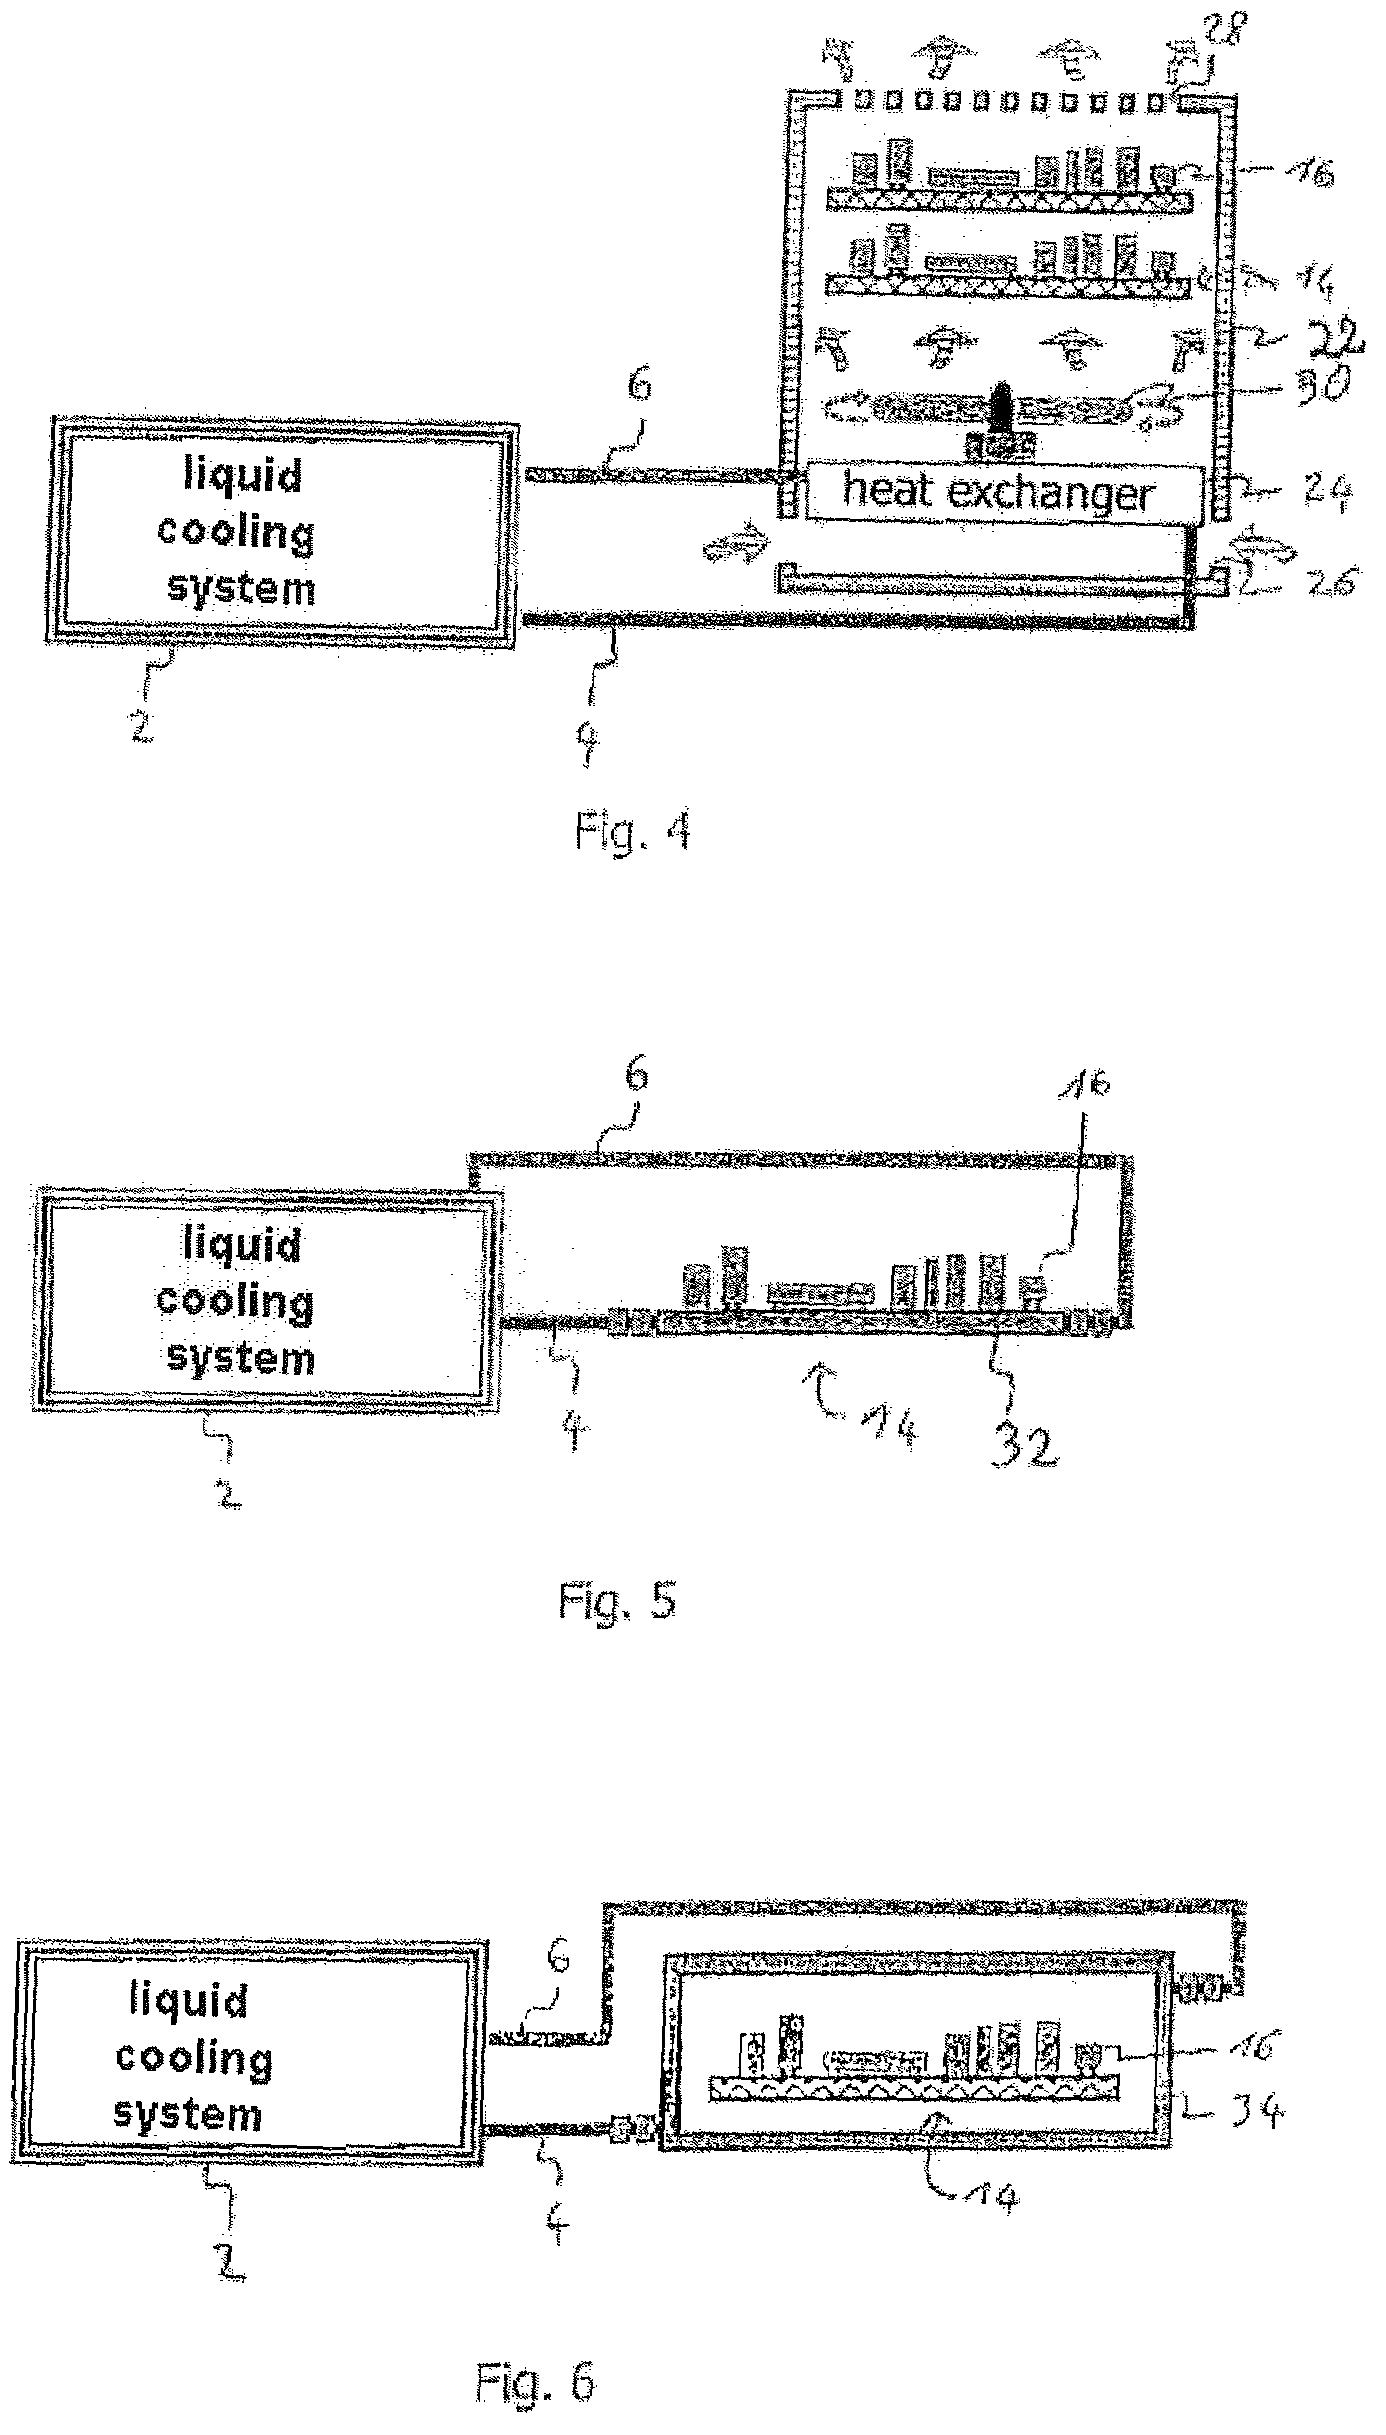 Aircraft electronics cooling apparatus for an aircraft having a liquid cooling system